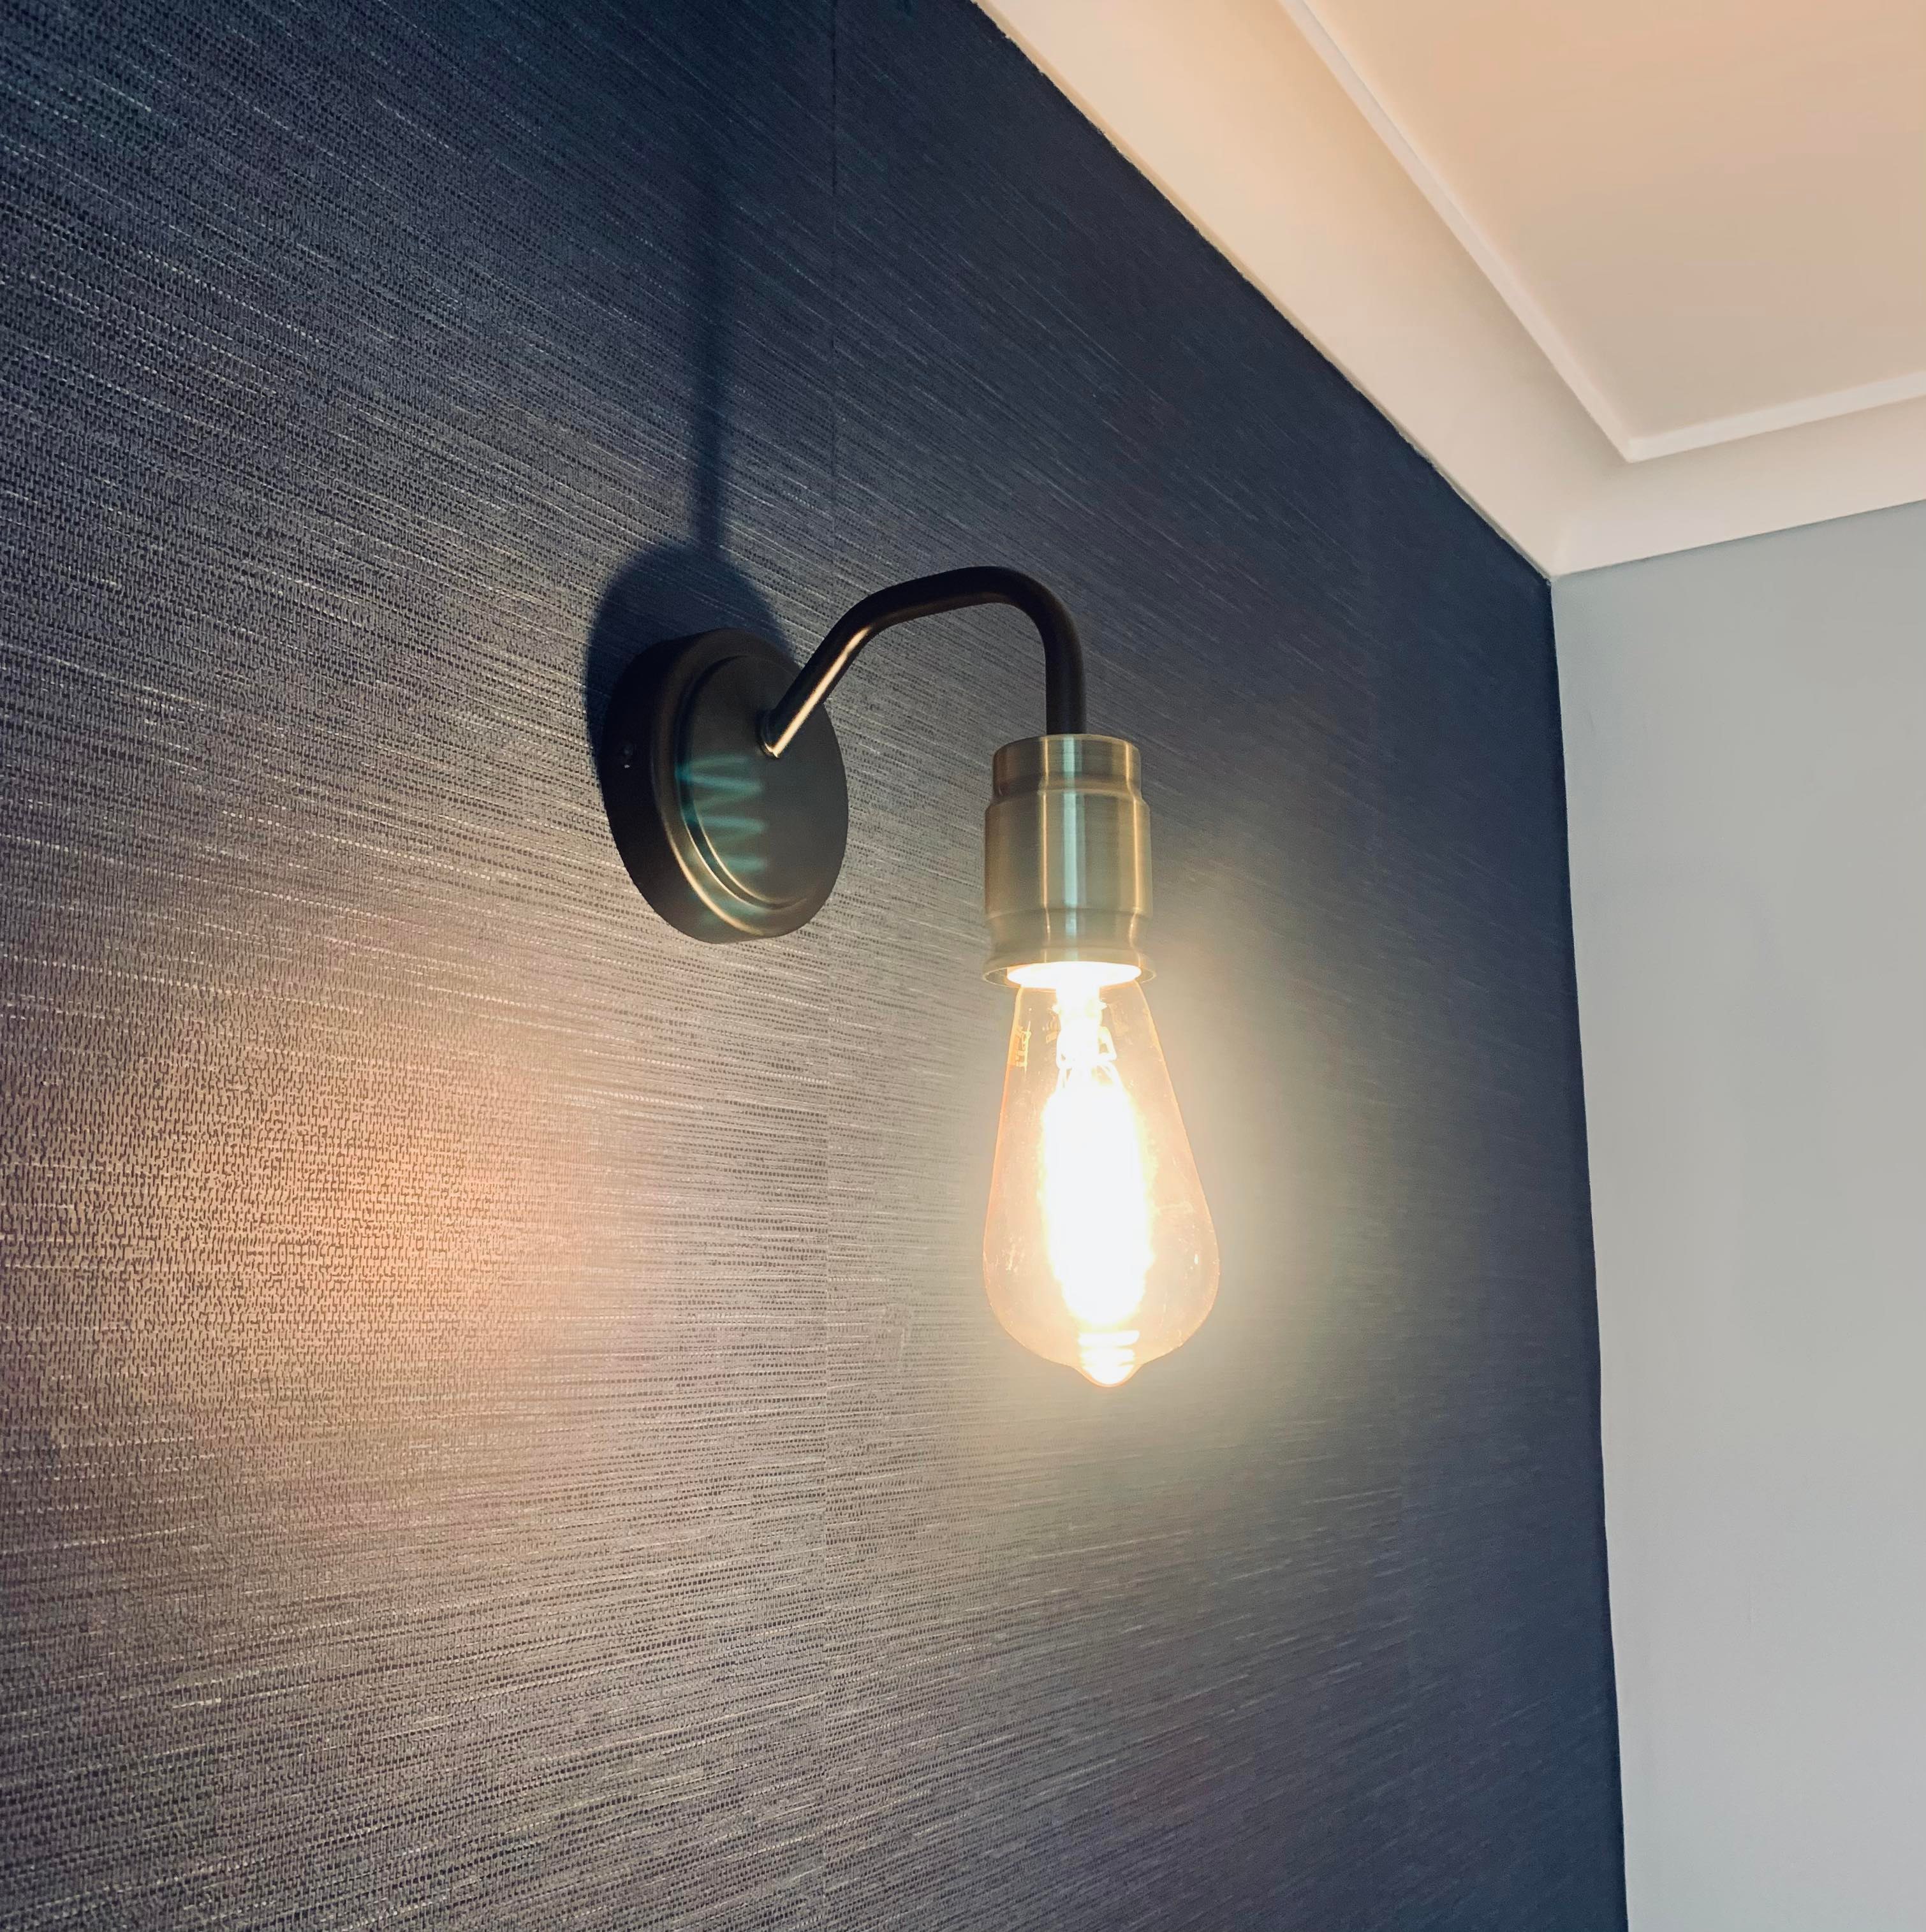 A wall light installed by JJB Electrical